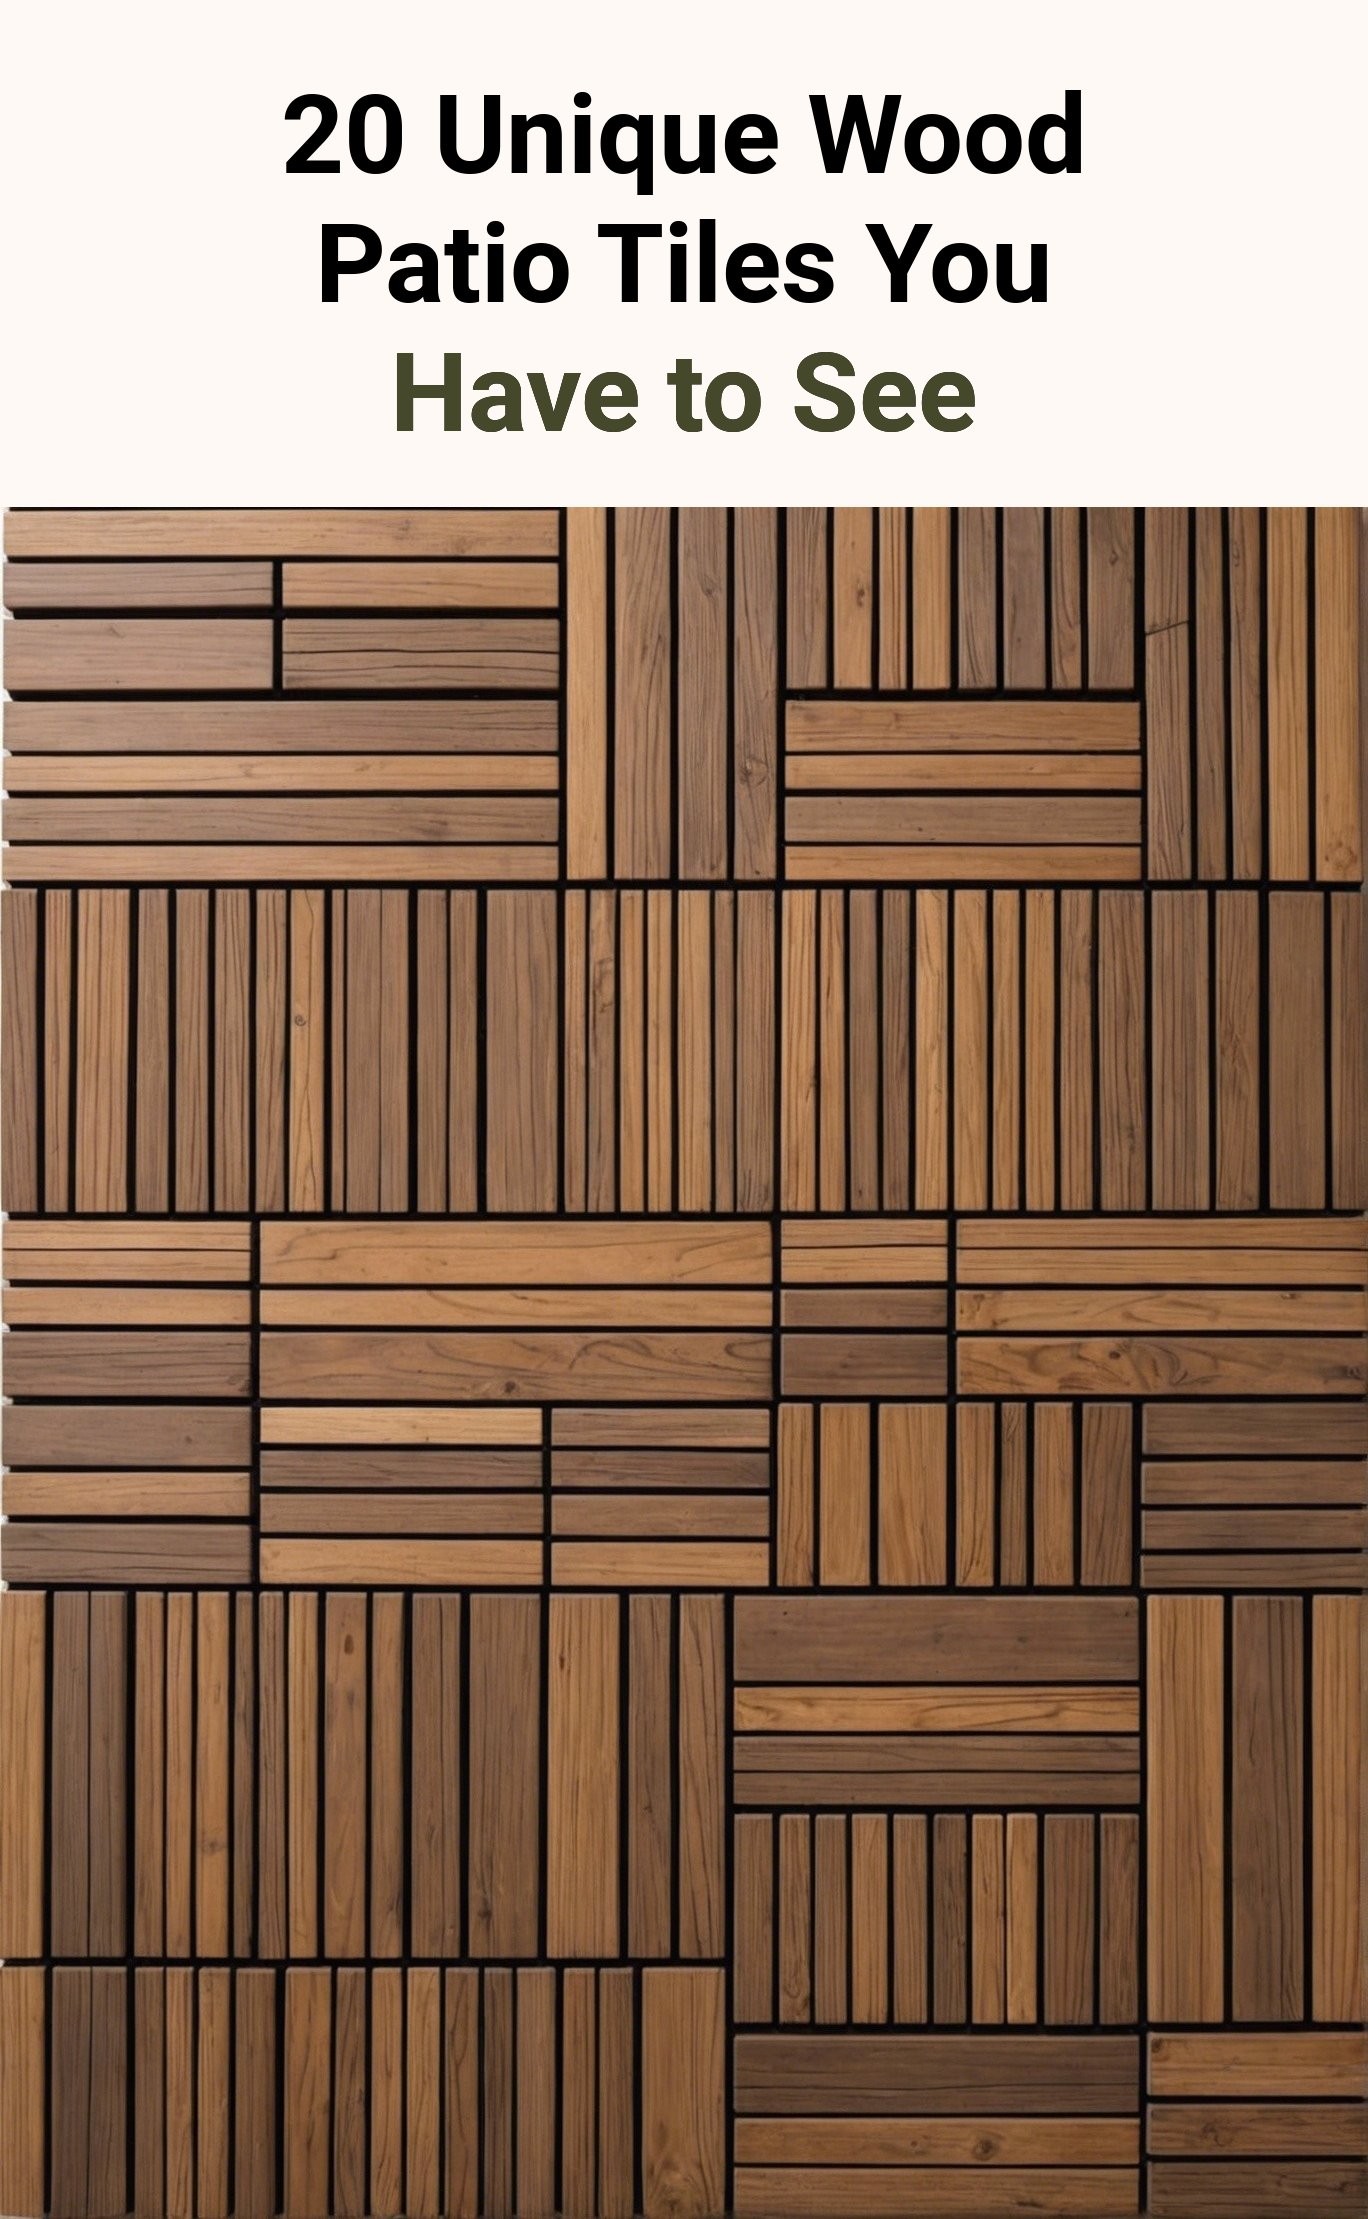 20 Unique Wood Patio Tiles You Have to See